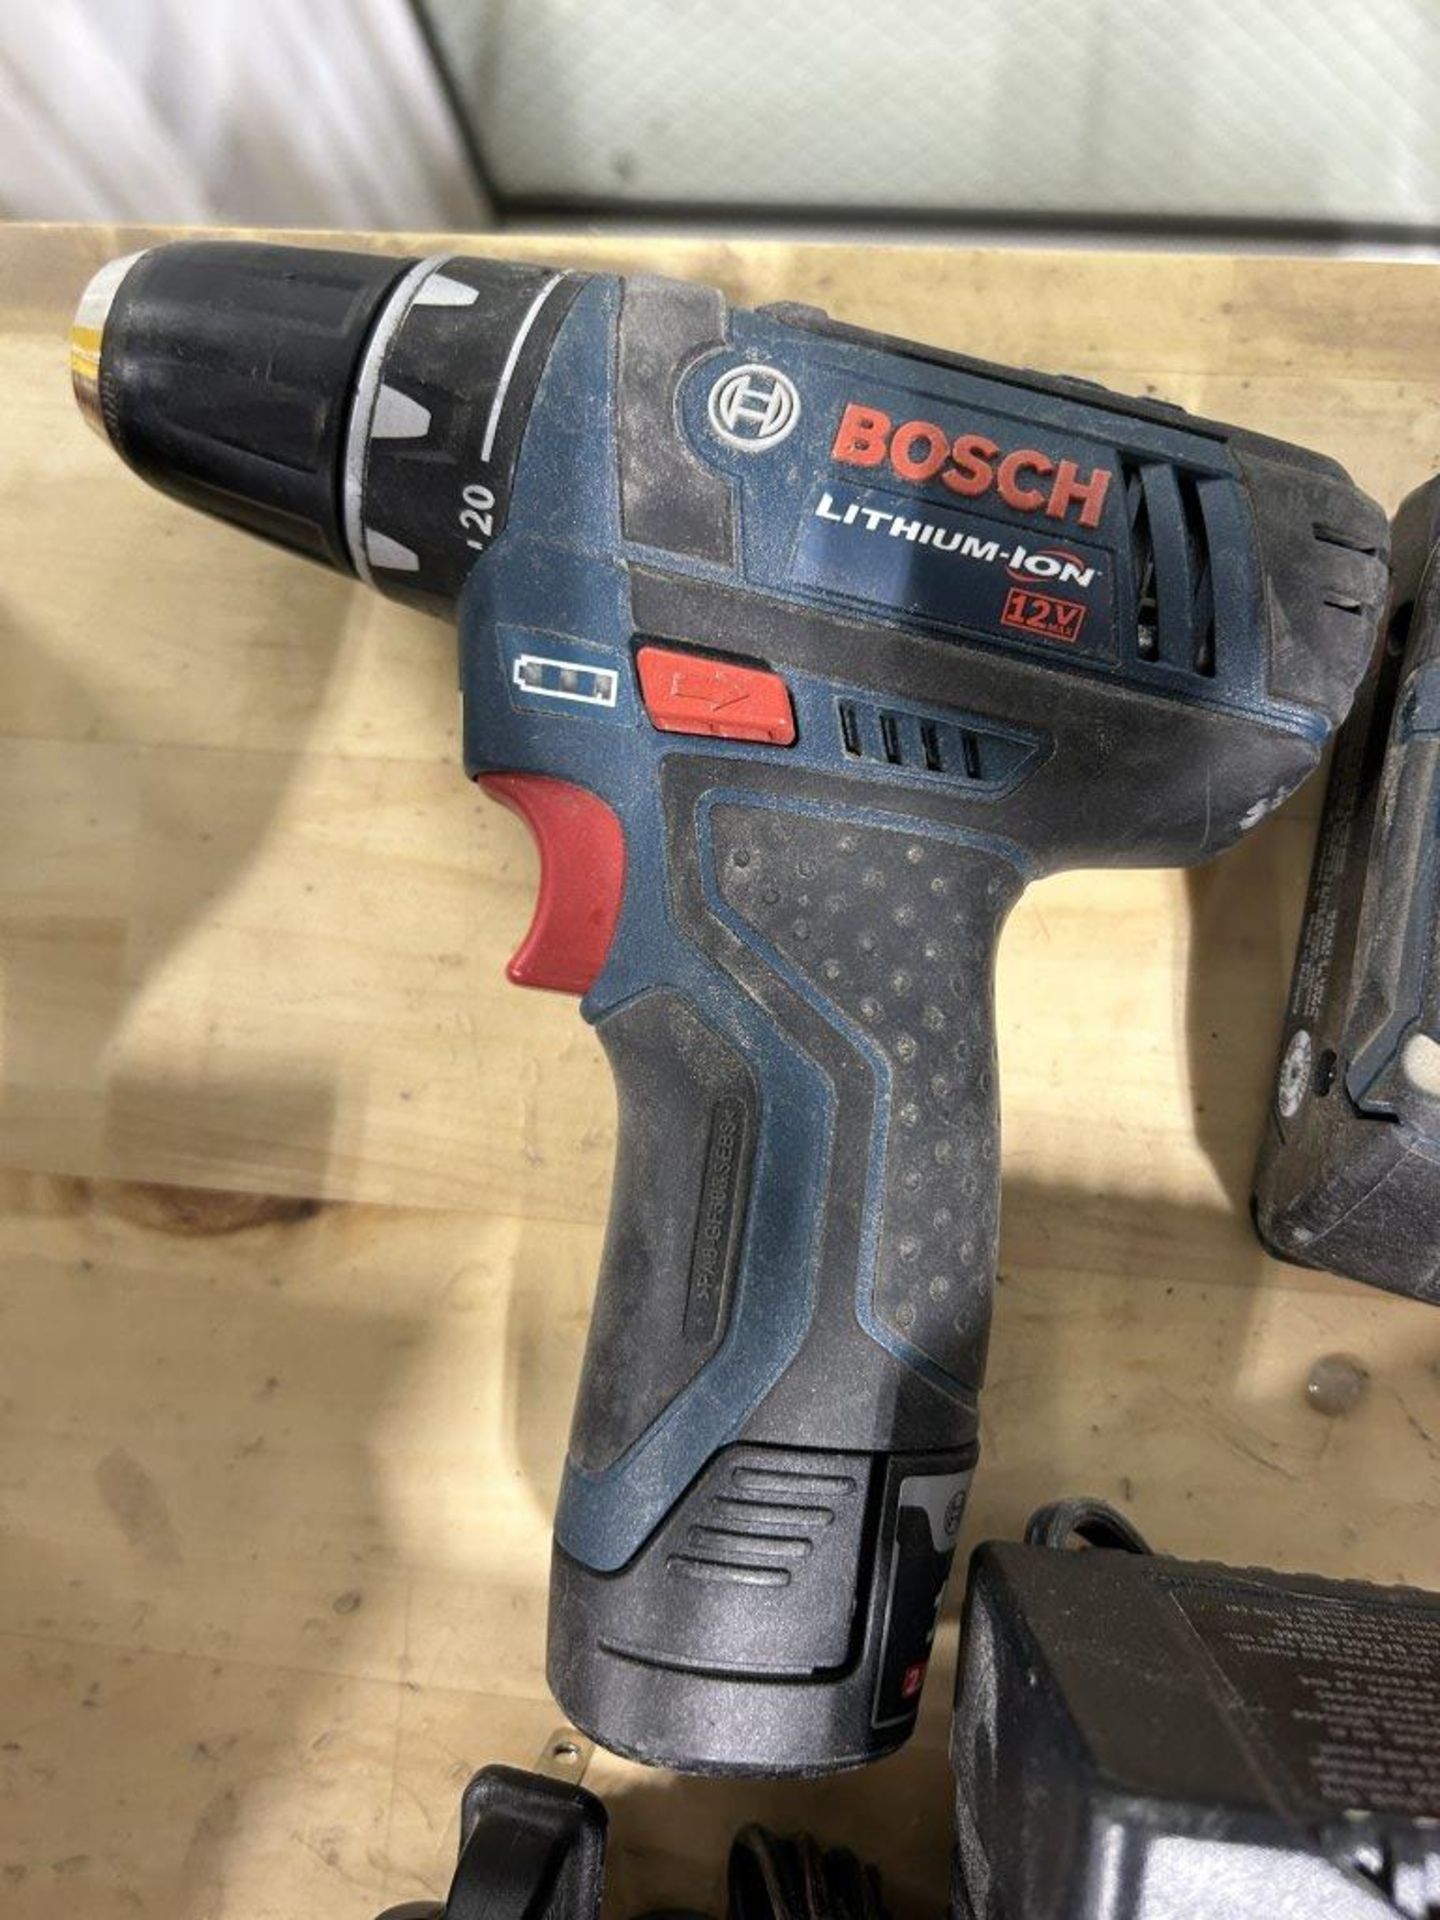 BOSCH LITHIUM ION 18V & 12V CORDLESS DRILLS, EACH WITH 2 BATTERIES AND CHARGER - Image 3 of 3